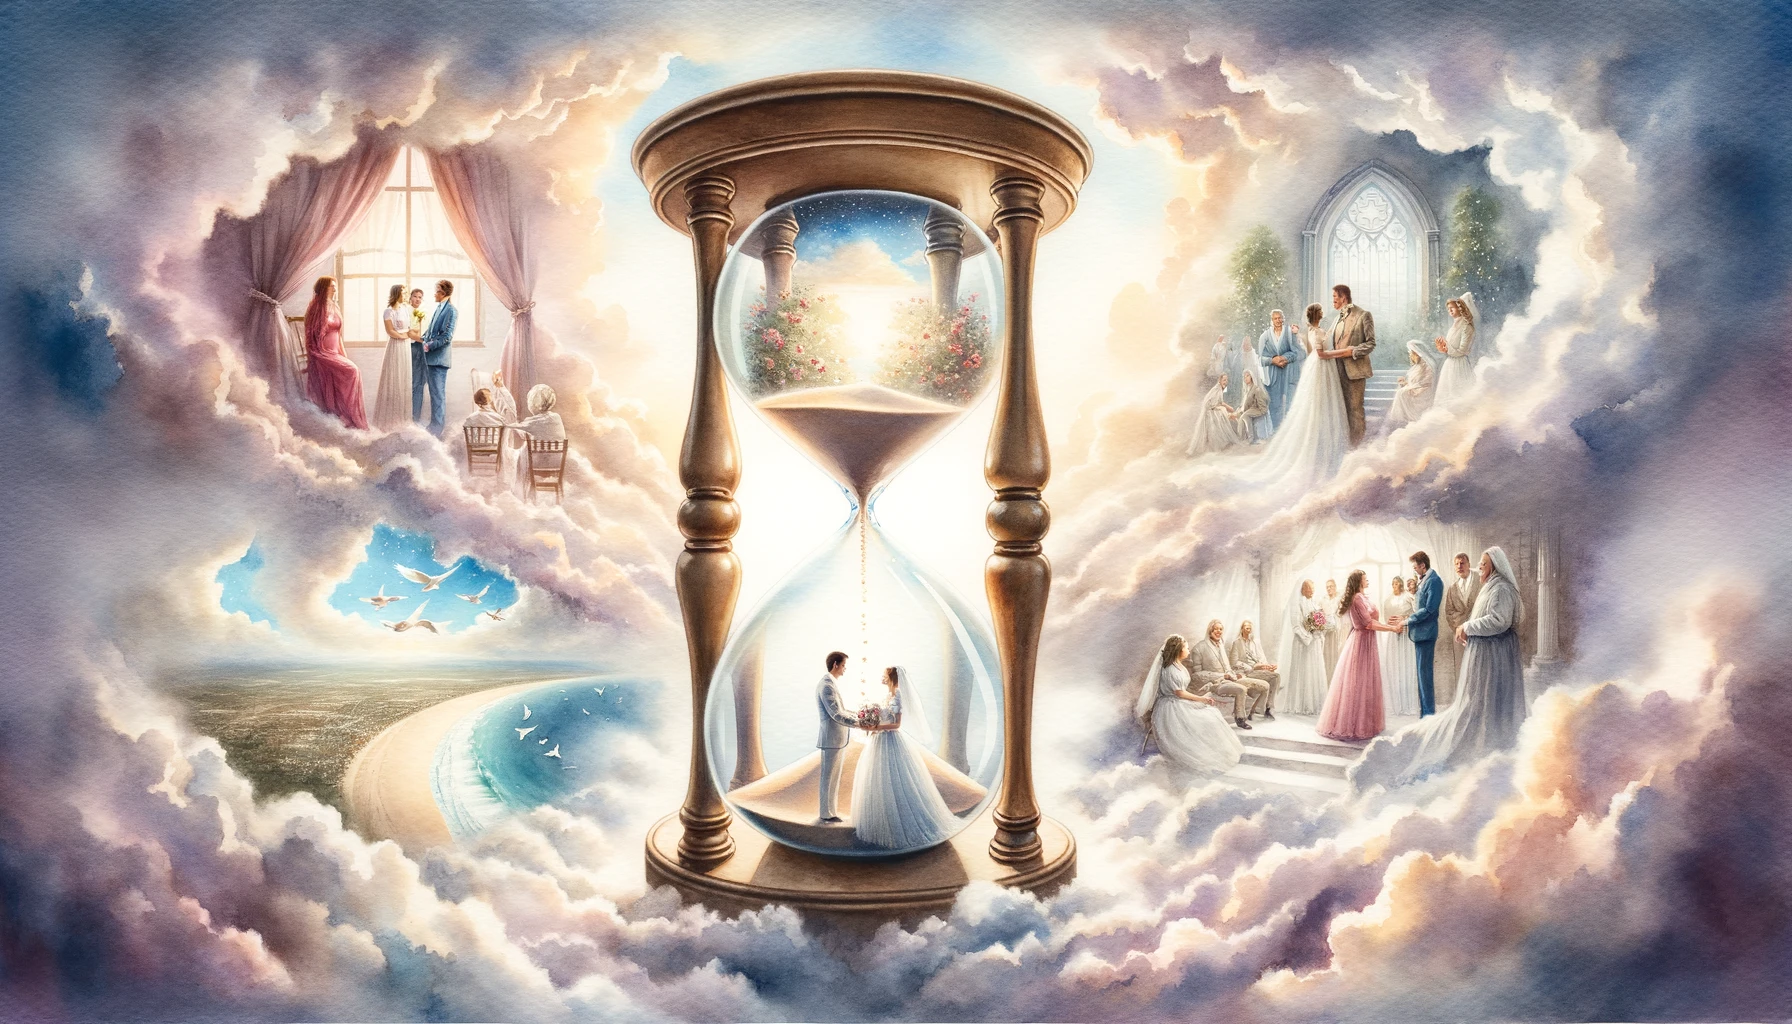 Vintage hourglass against heavenly clouds. Scenes of life events inside - proposals, weddings, prayer. Depicts divine timing and Scriptural guidance on marriage.